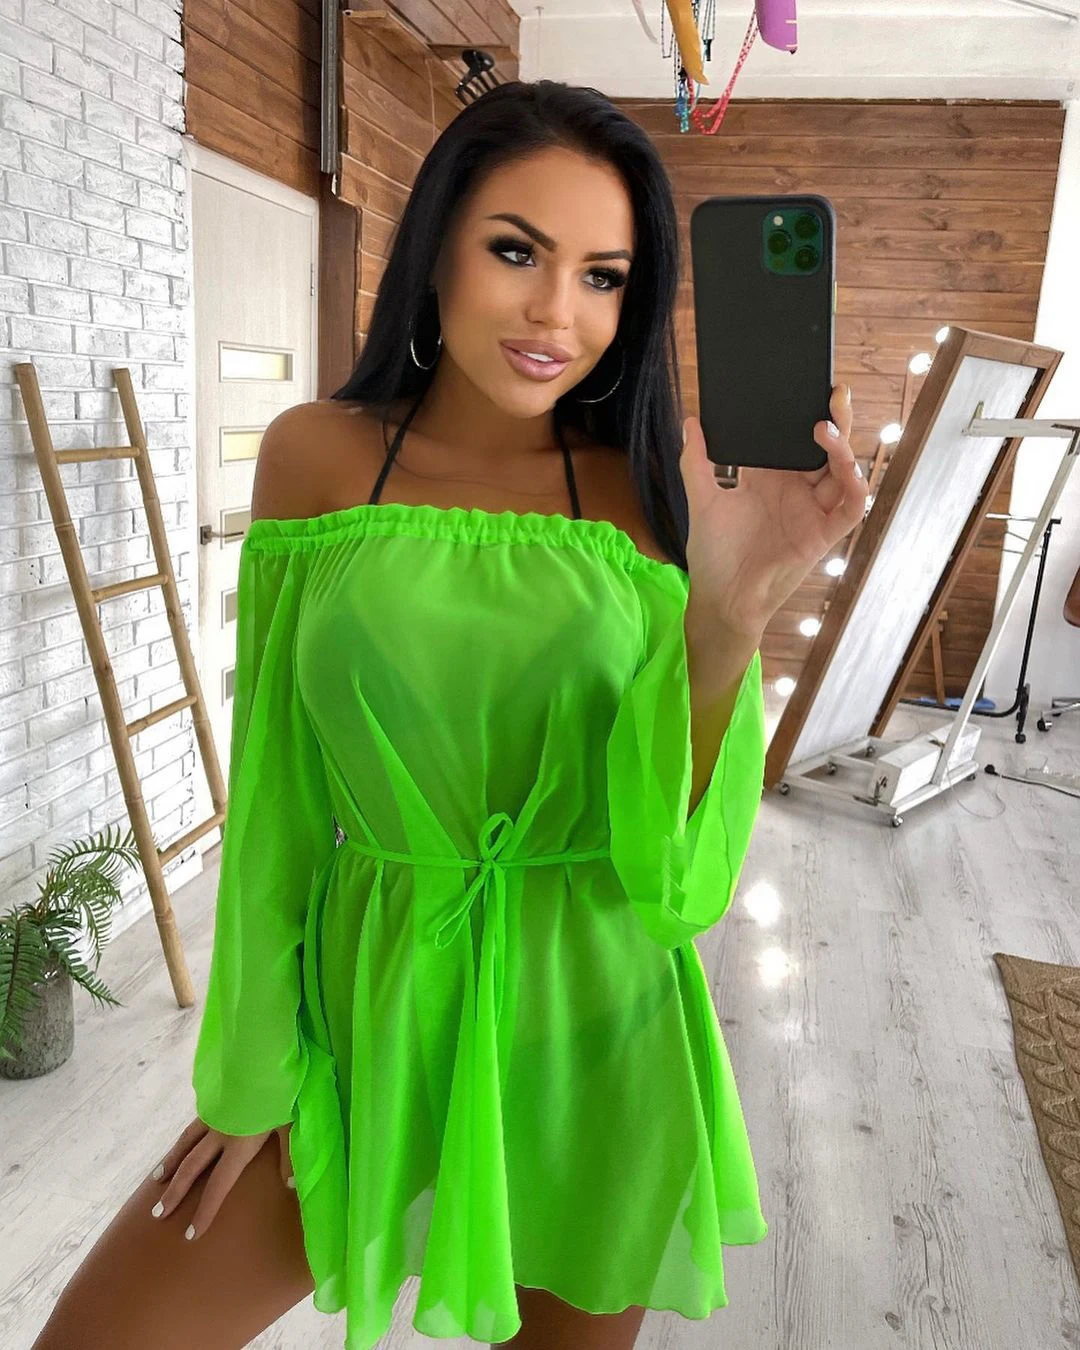 New Womens Elegant Summer Sexy Perspective Bikini Smock Fashion Solid Color Boat Neck Short Beach Dress Casual And Refreshing sexy bathing suit cover ups Cover-Ups